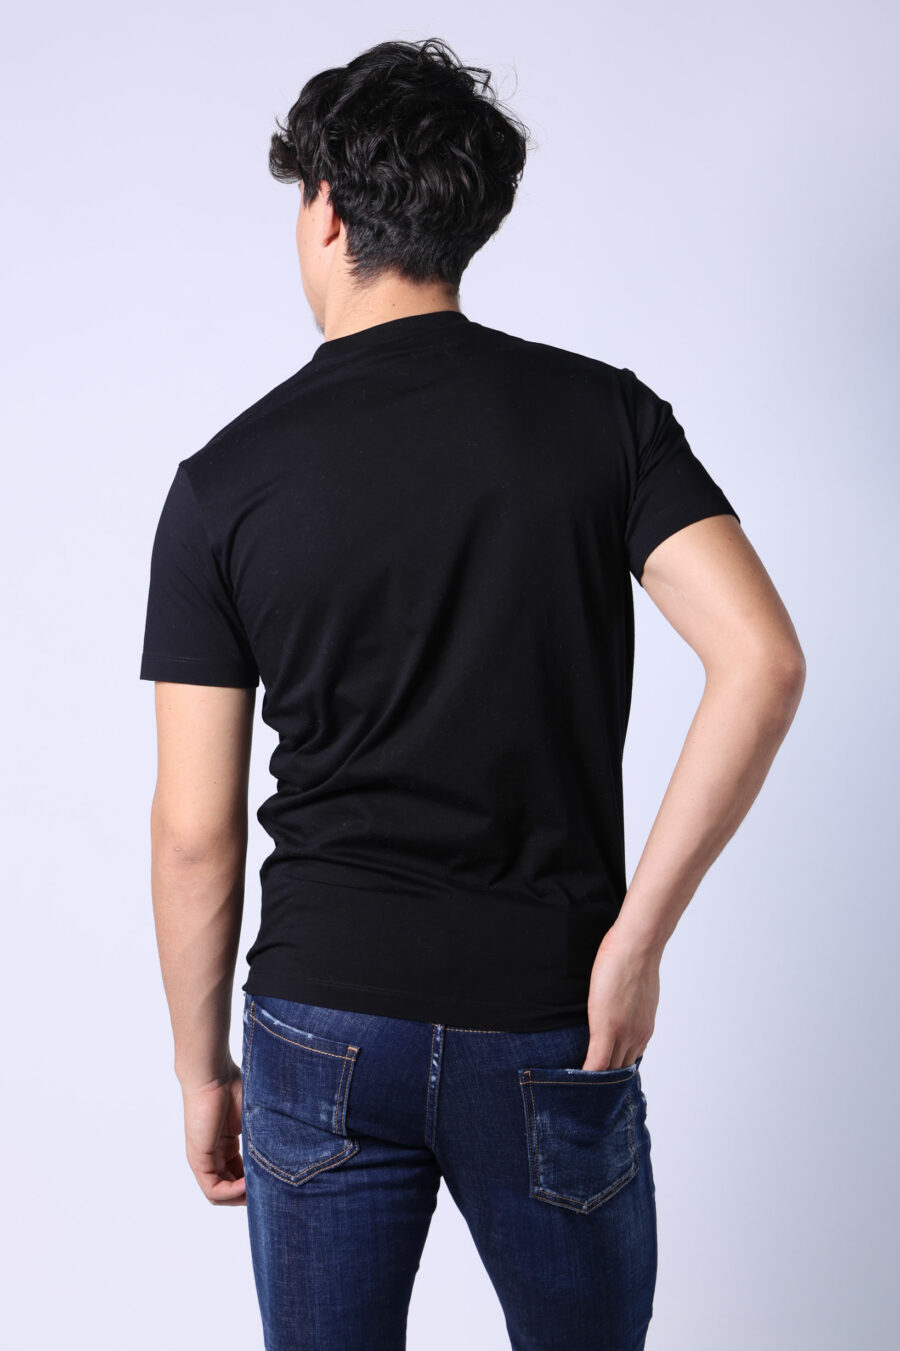 Black T-shirt with "sitckers" maxi logo - Untitled Catalog 05495